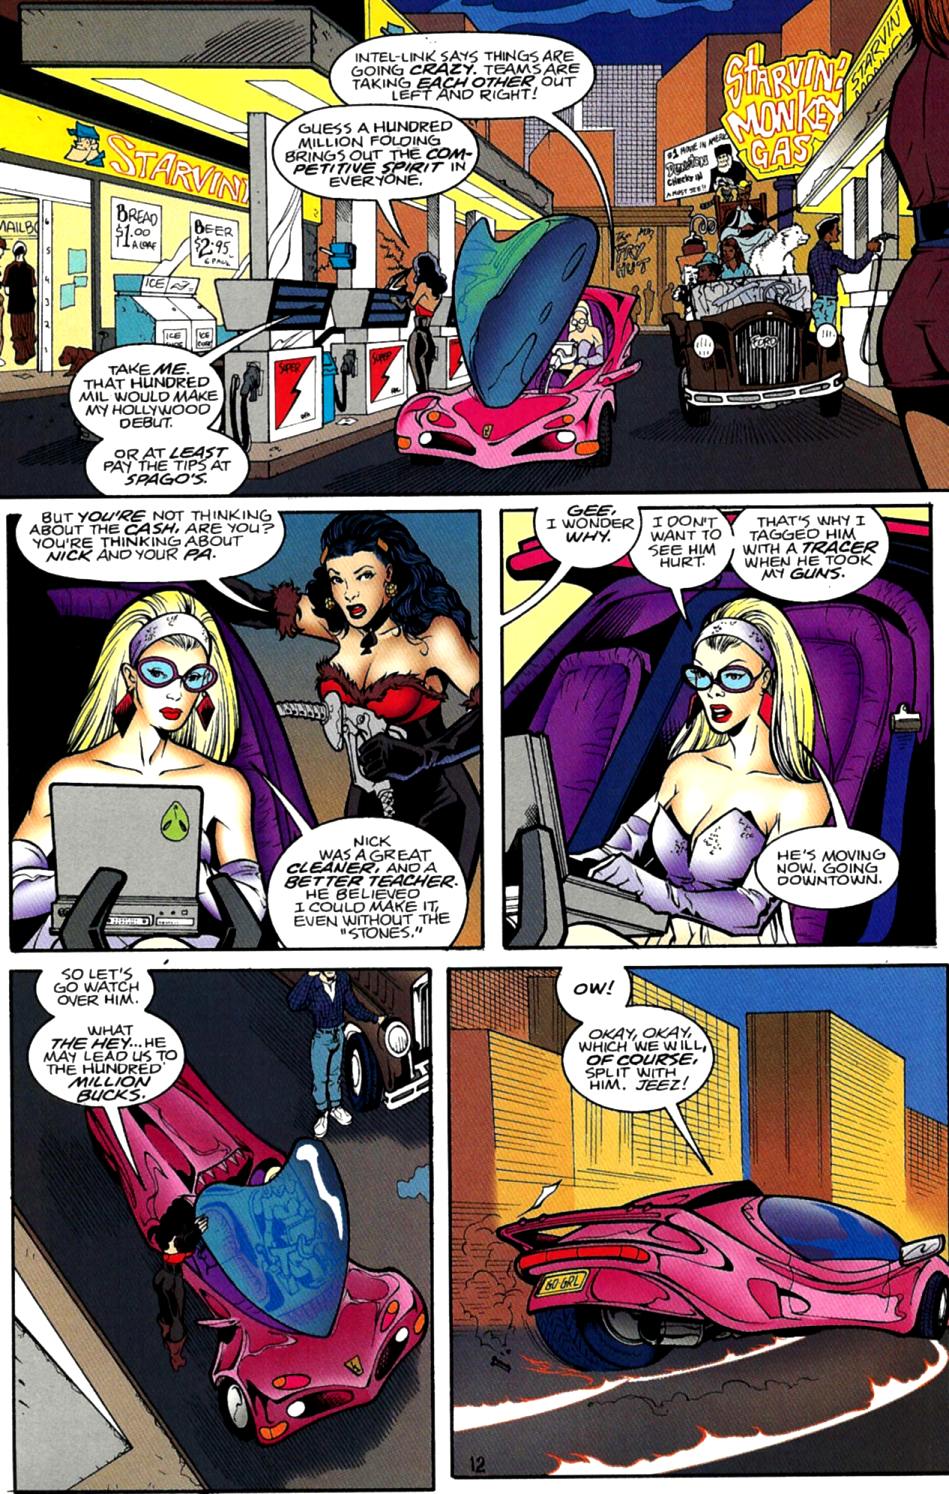 Read online Body Doubles (Villains) comic -  Issue # Full - 13